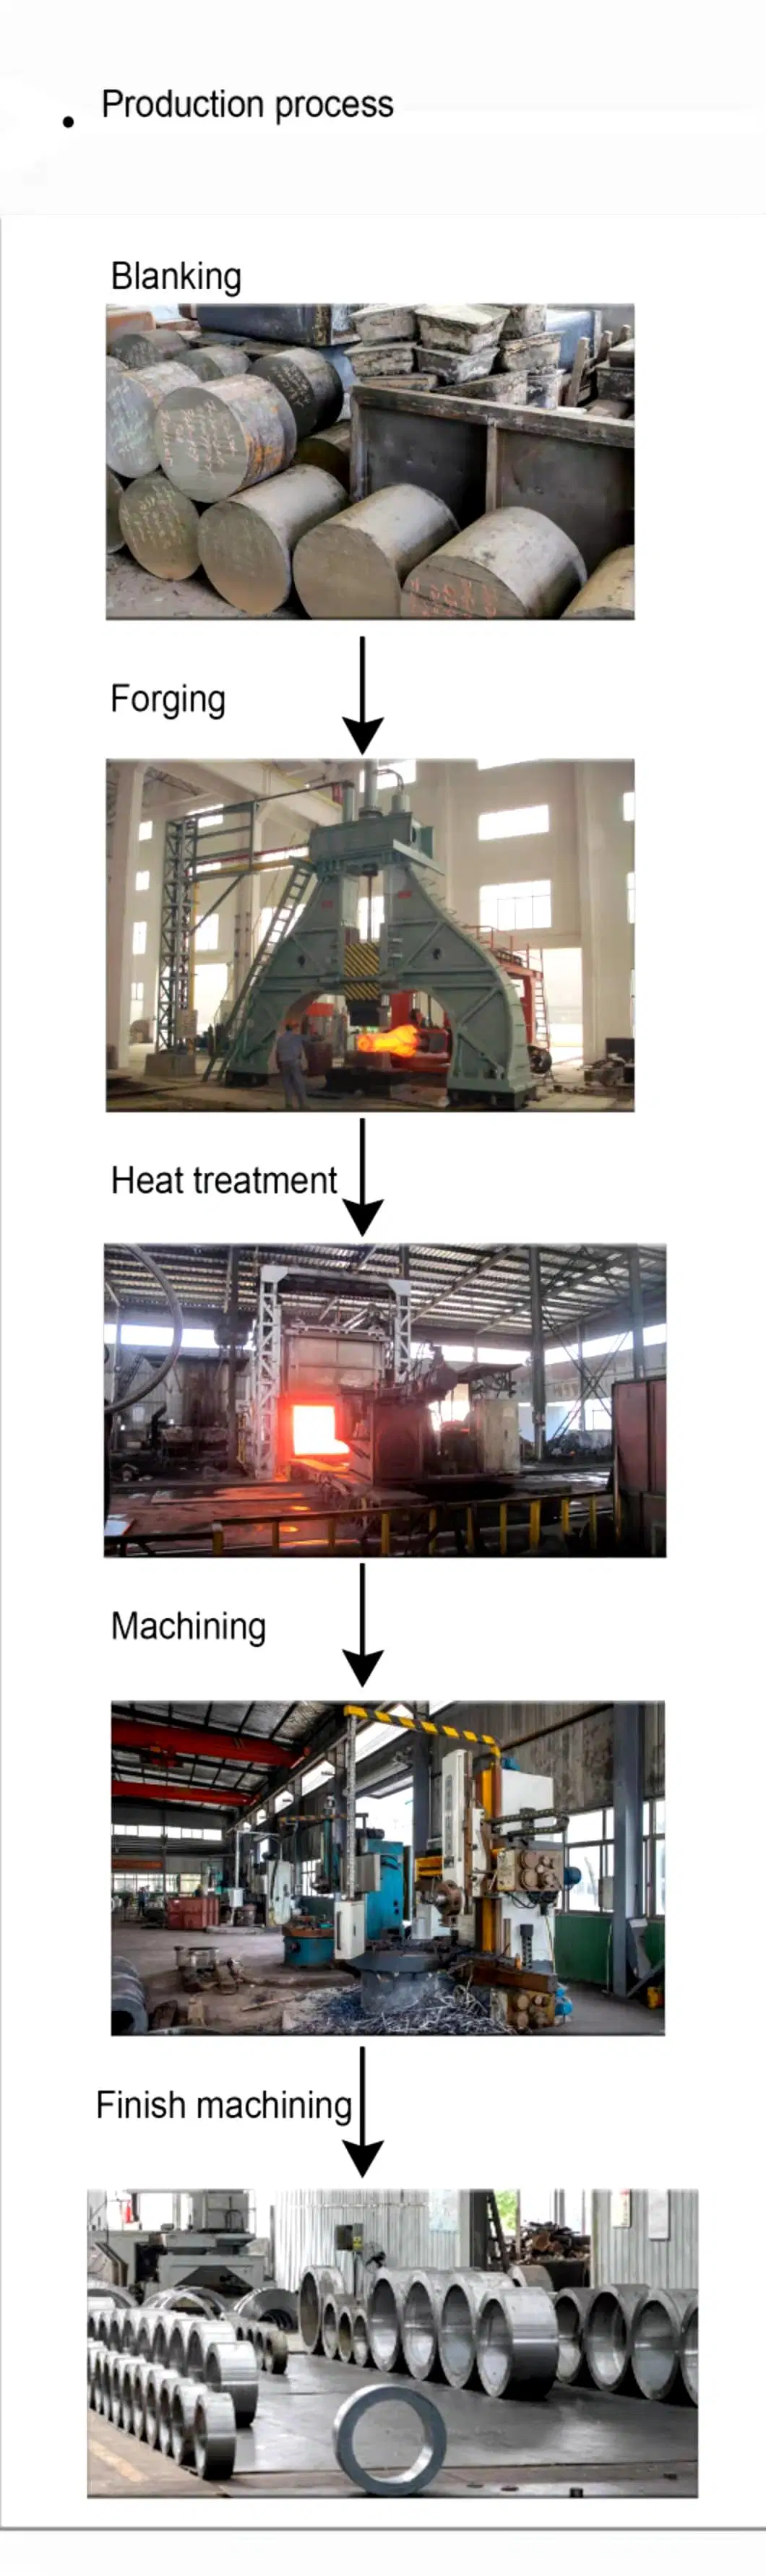 Stainless Steel and Heat Resistant Steel for Petroleum Metallurgy and Electric Machinery